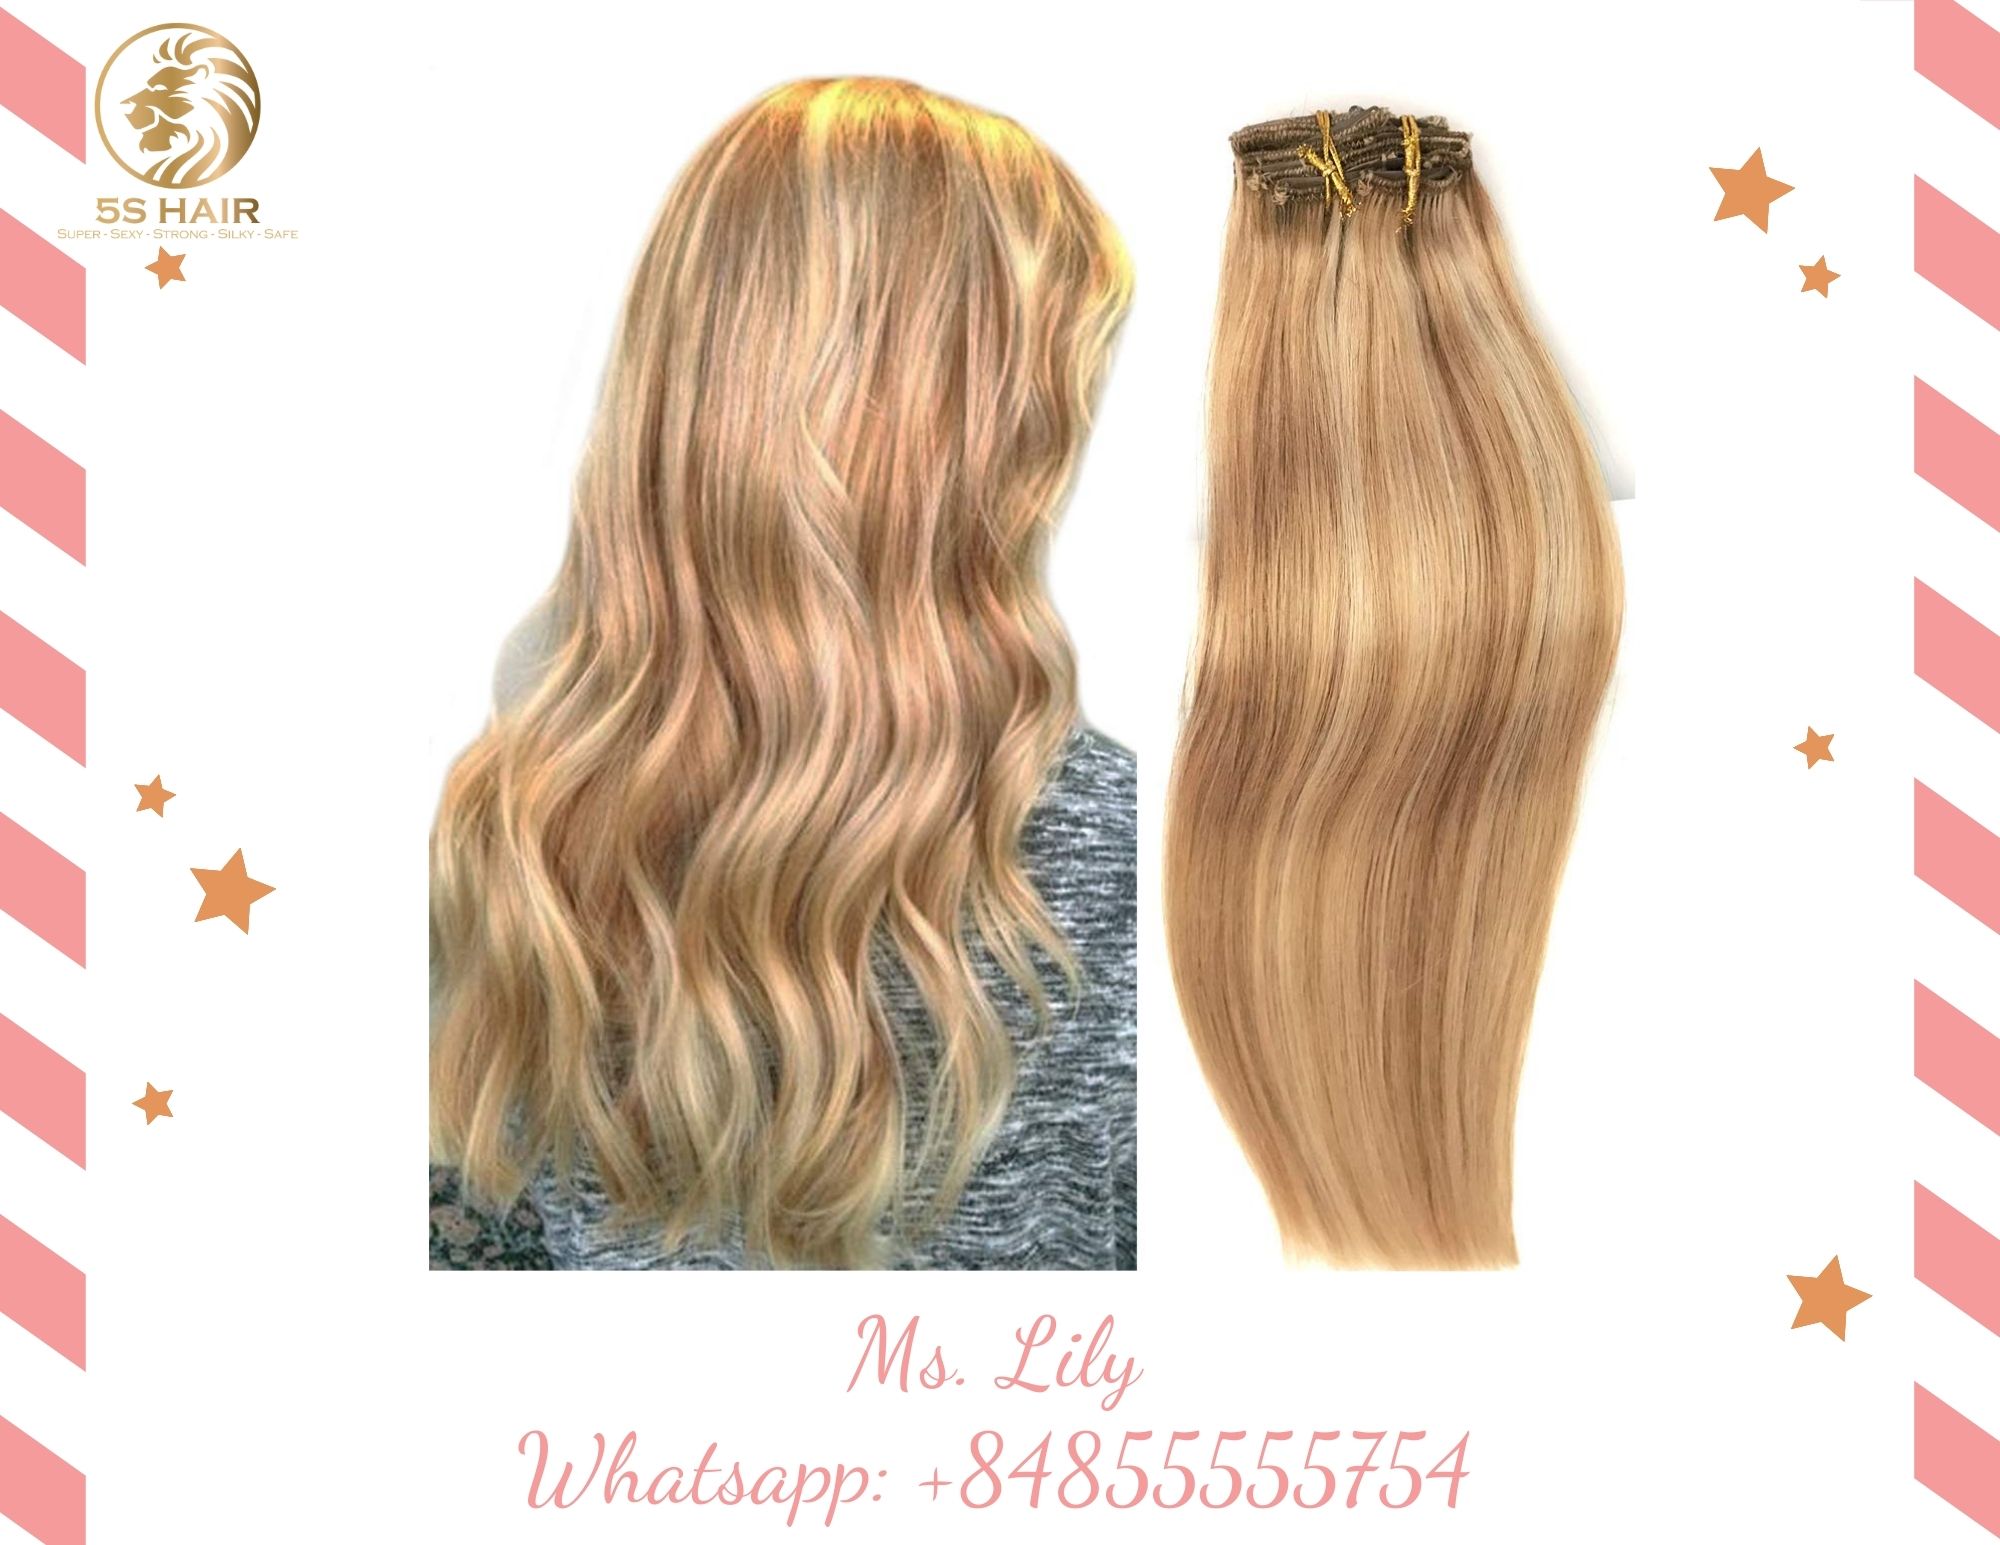 clip-hair-extension-hair-extension-products-are-both-convenient-and-fashionable-1